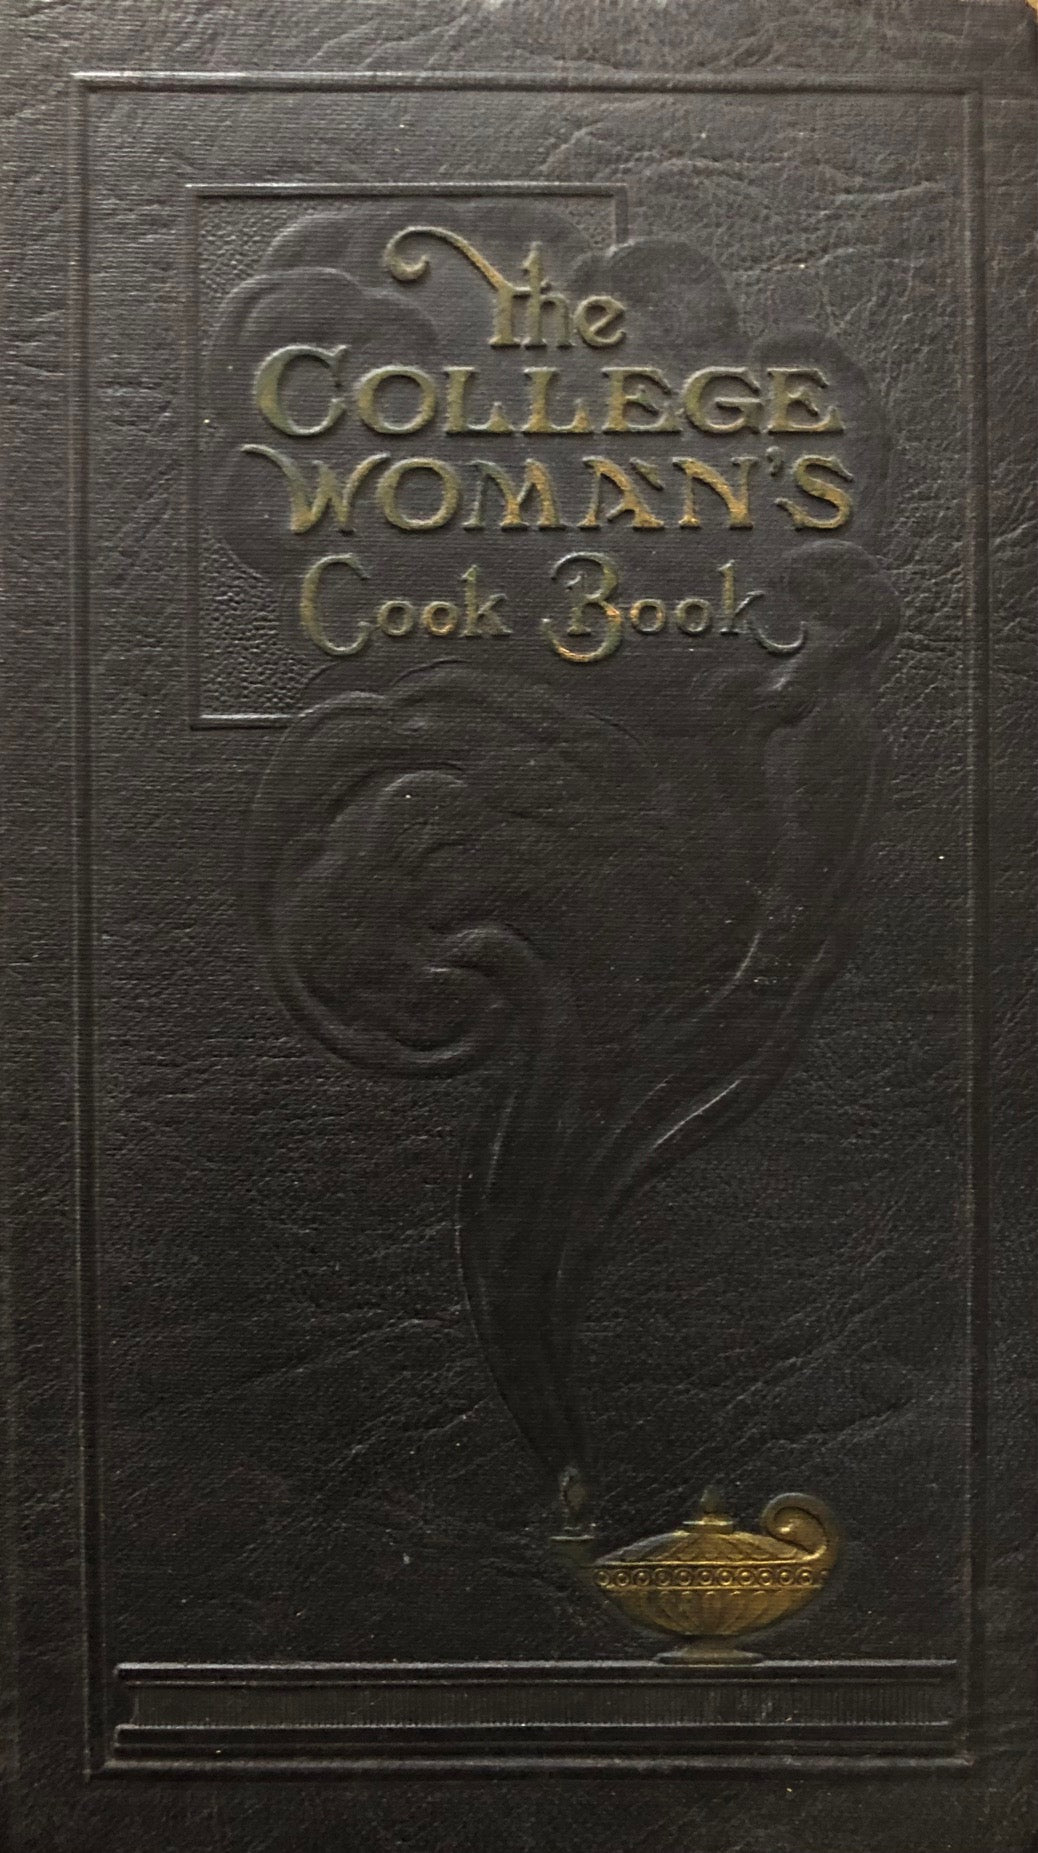 (College) The College Woman's Cook-Book.